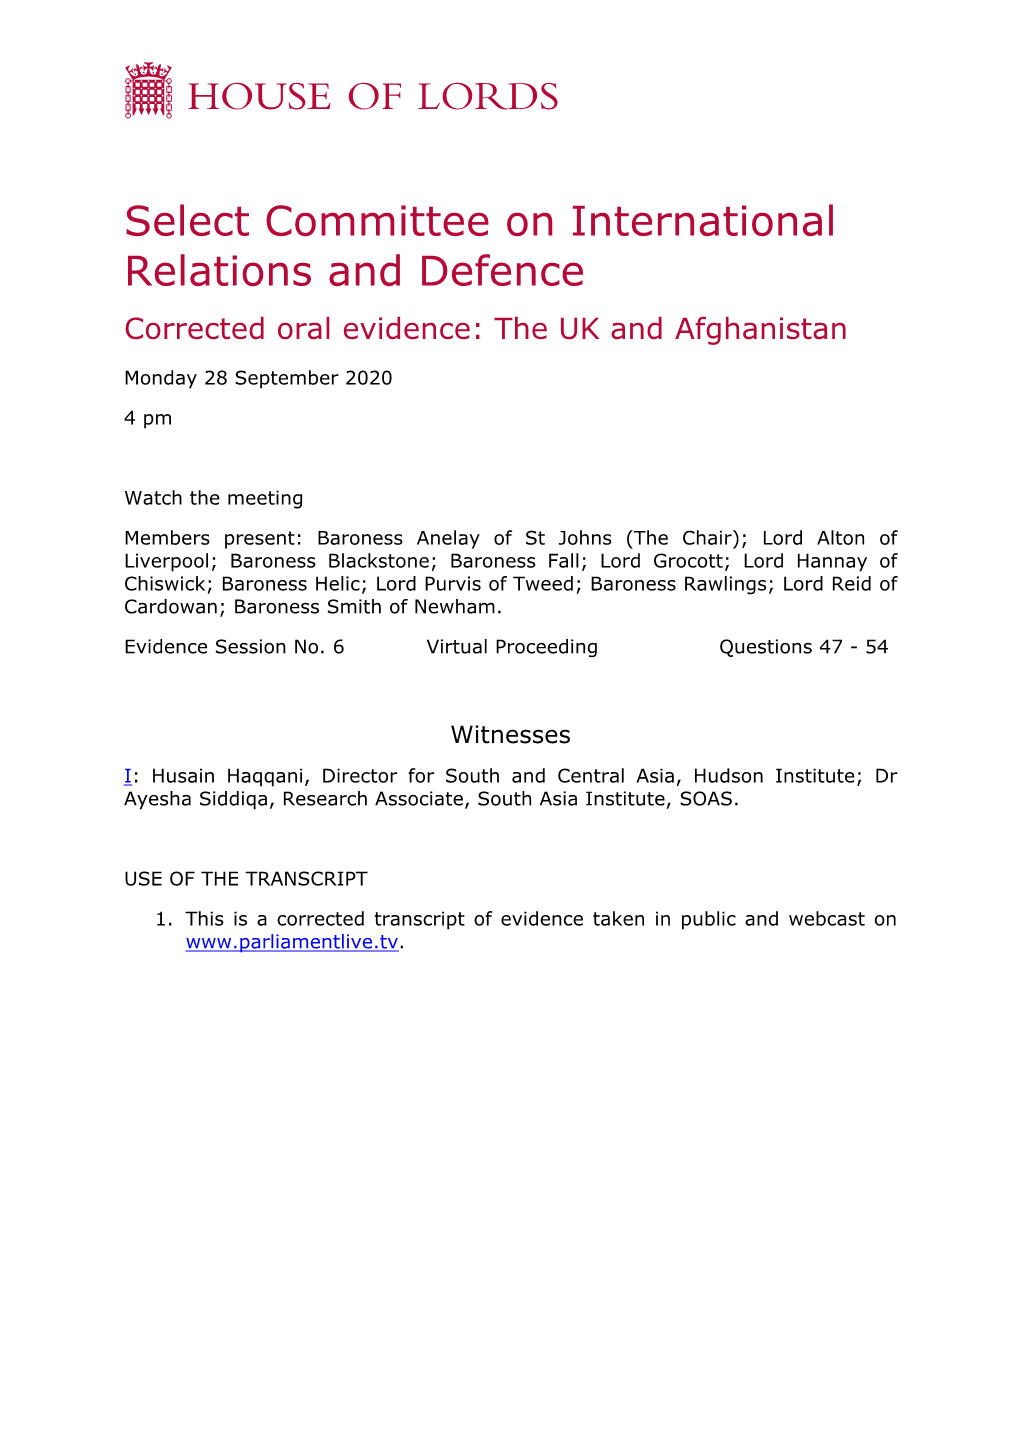 Select Committee on International Relations and Defence Corrected Oral Evidence: the UK and Afghanistan